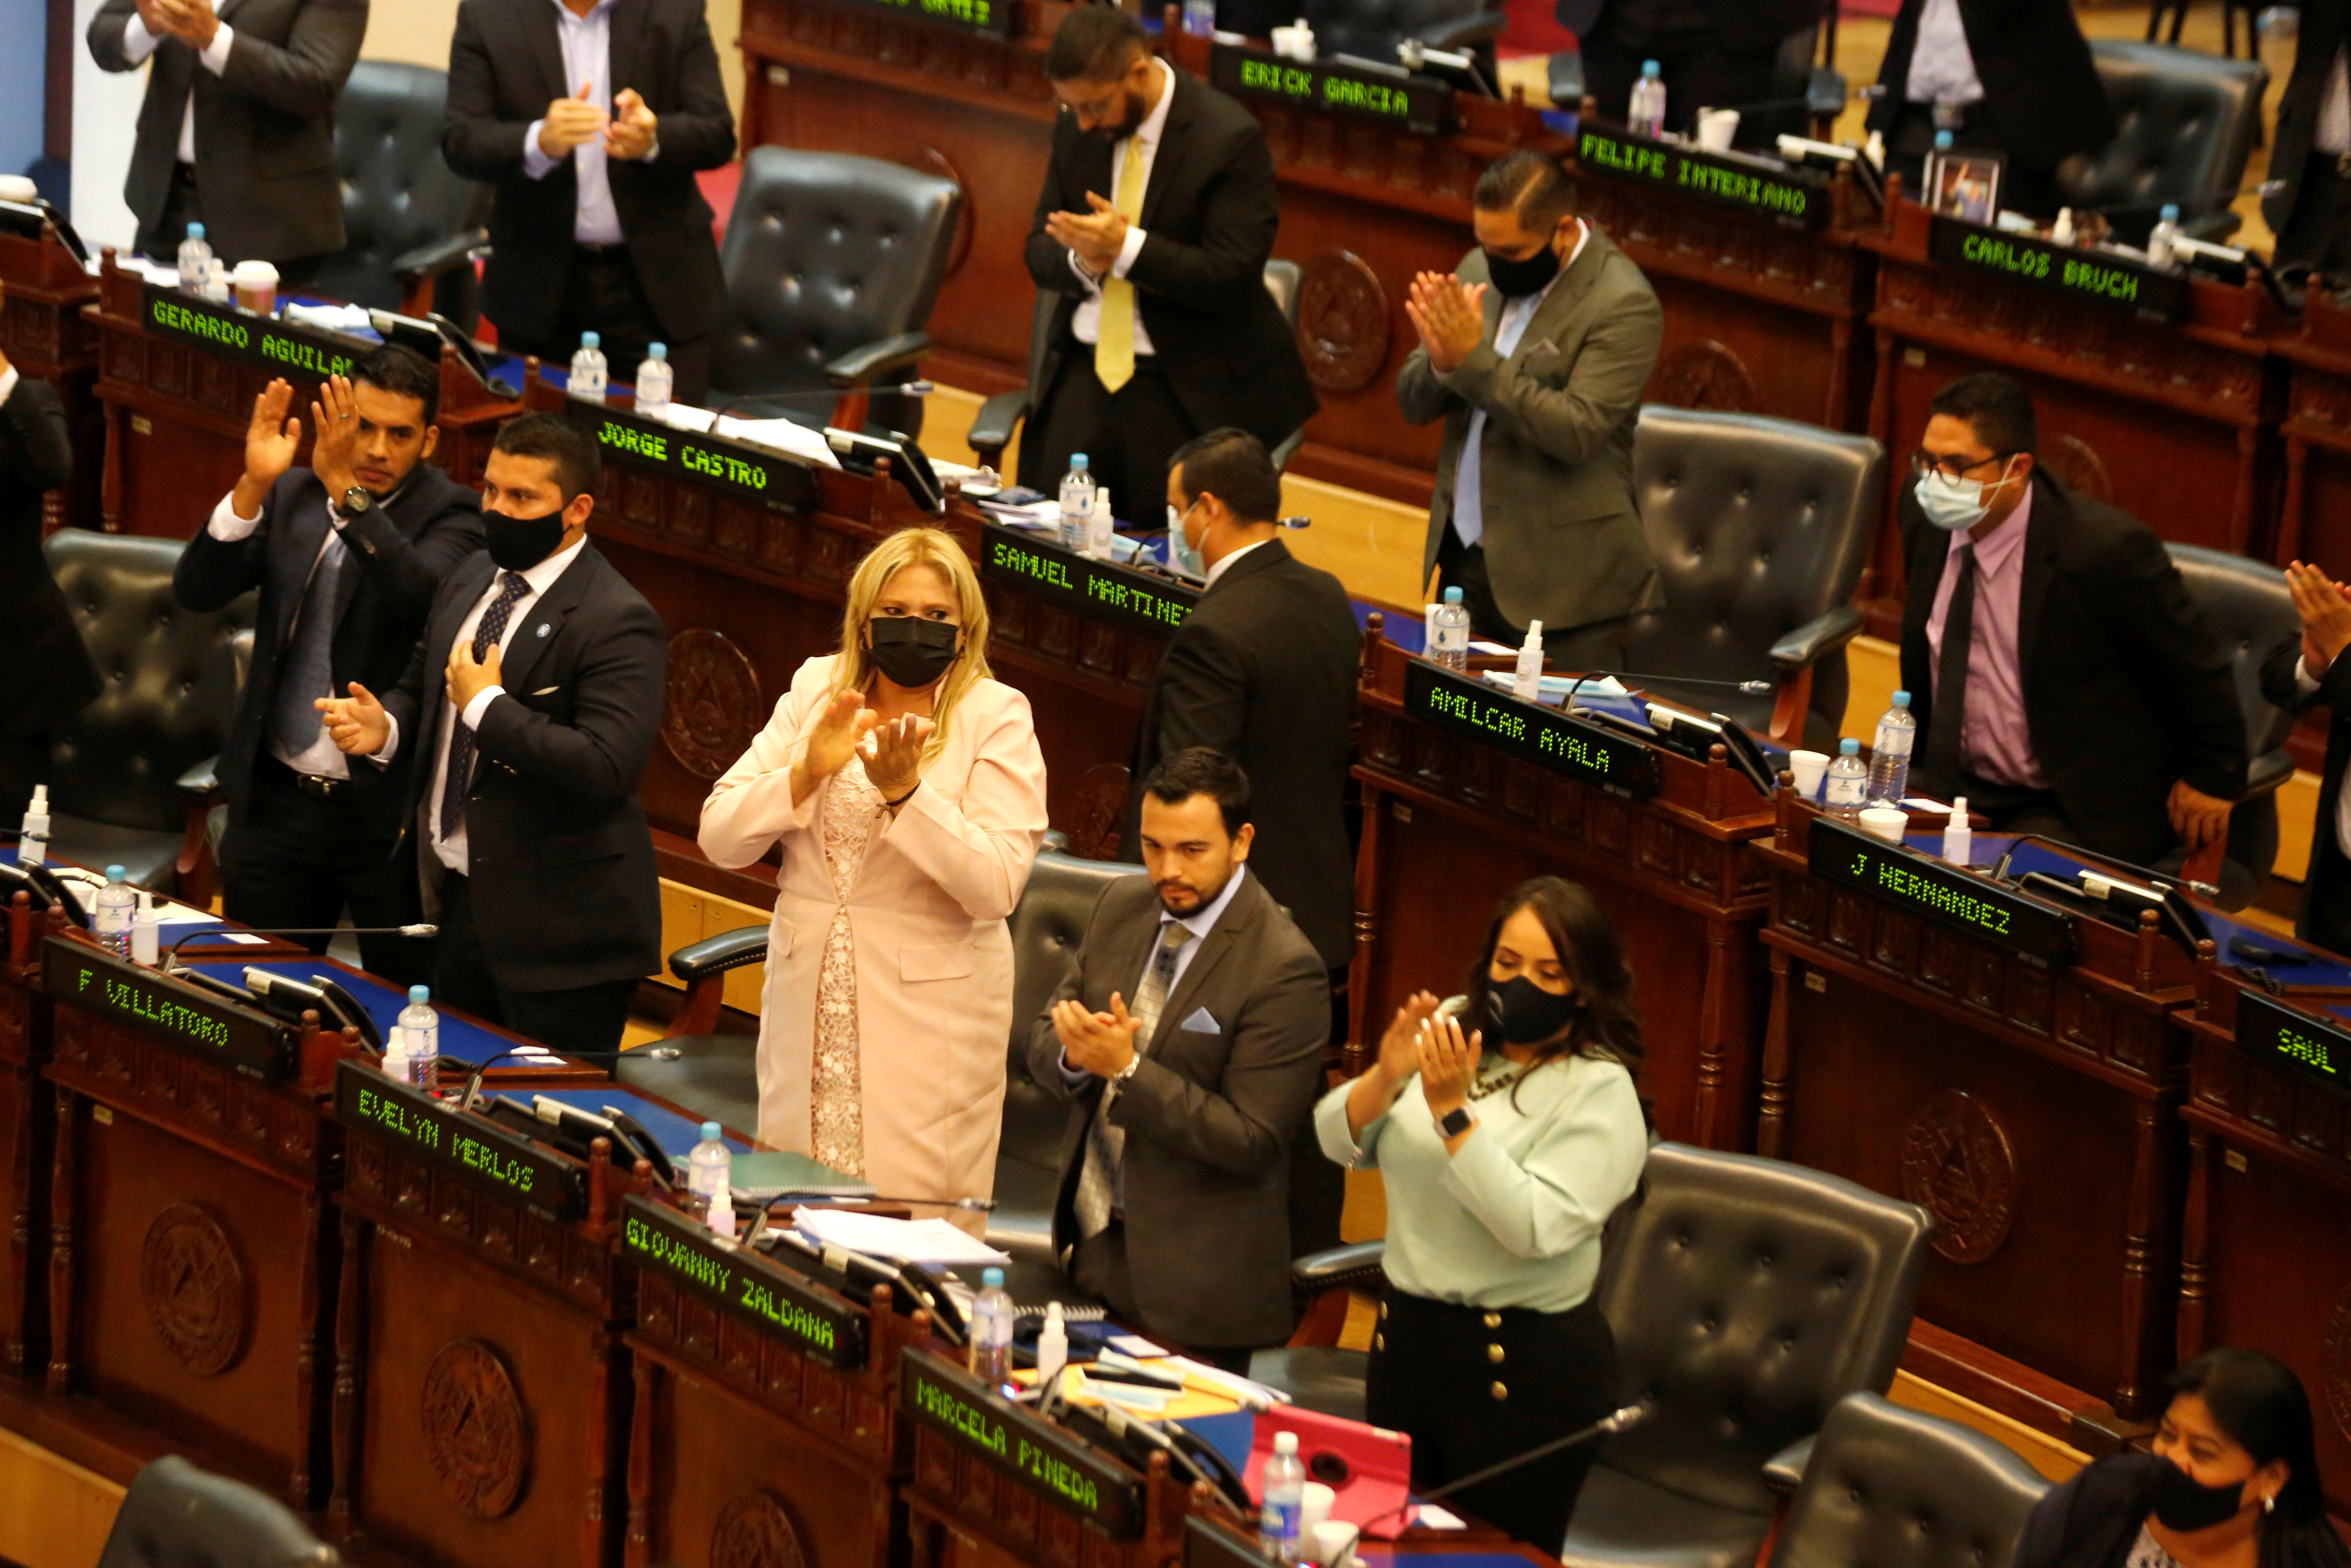 Salvadorean congress voted for the removal of Supreme Court judges at the salvadoran congress, in San Salvador